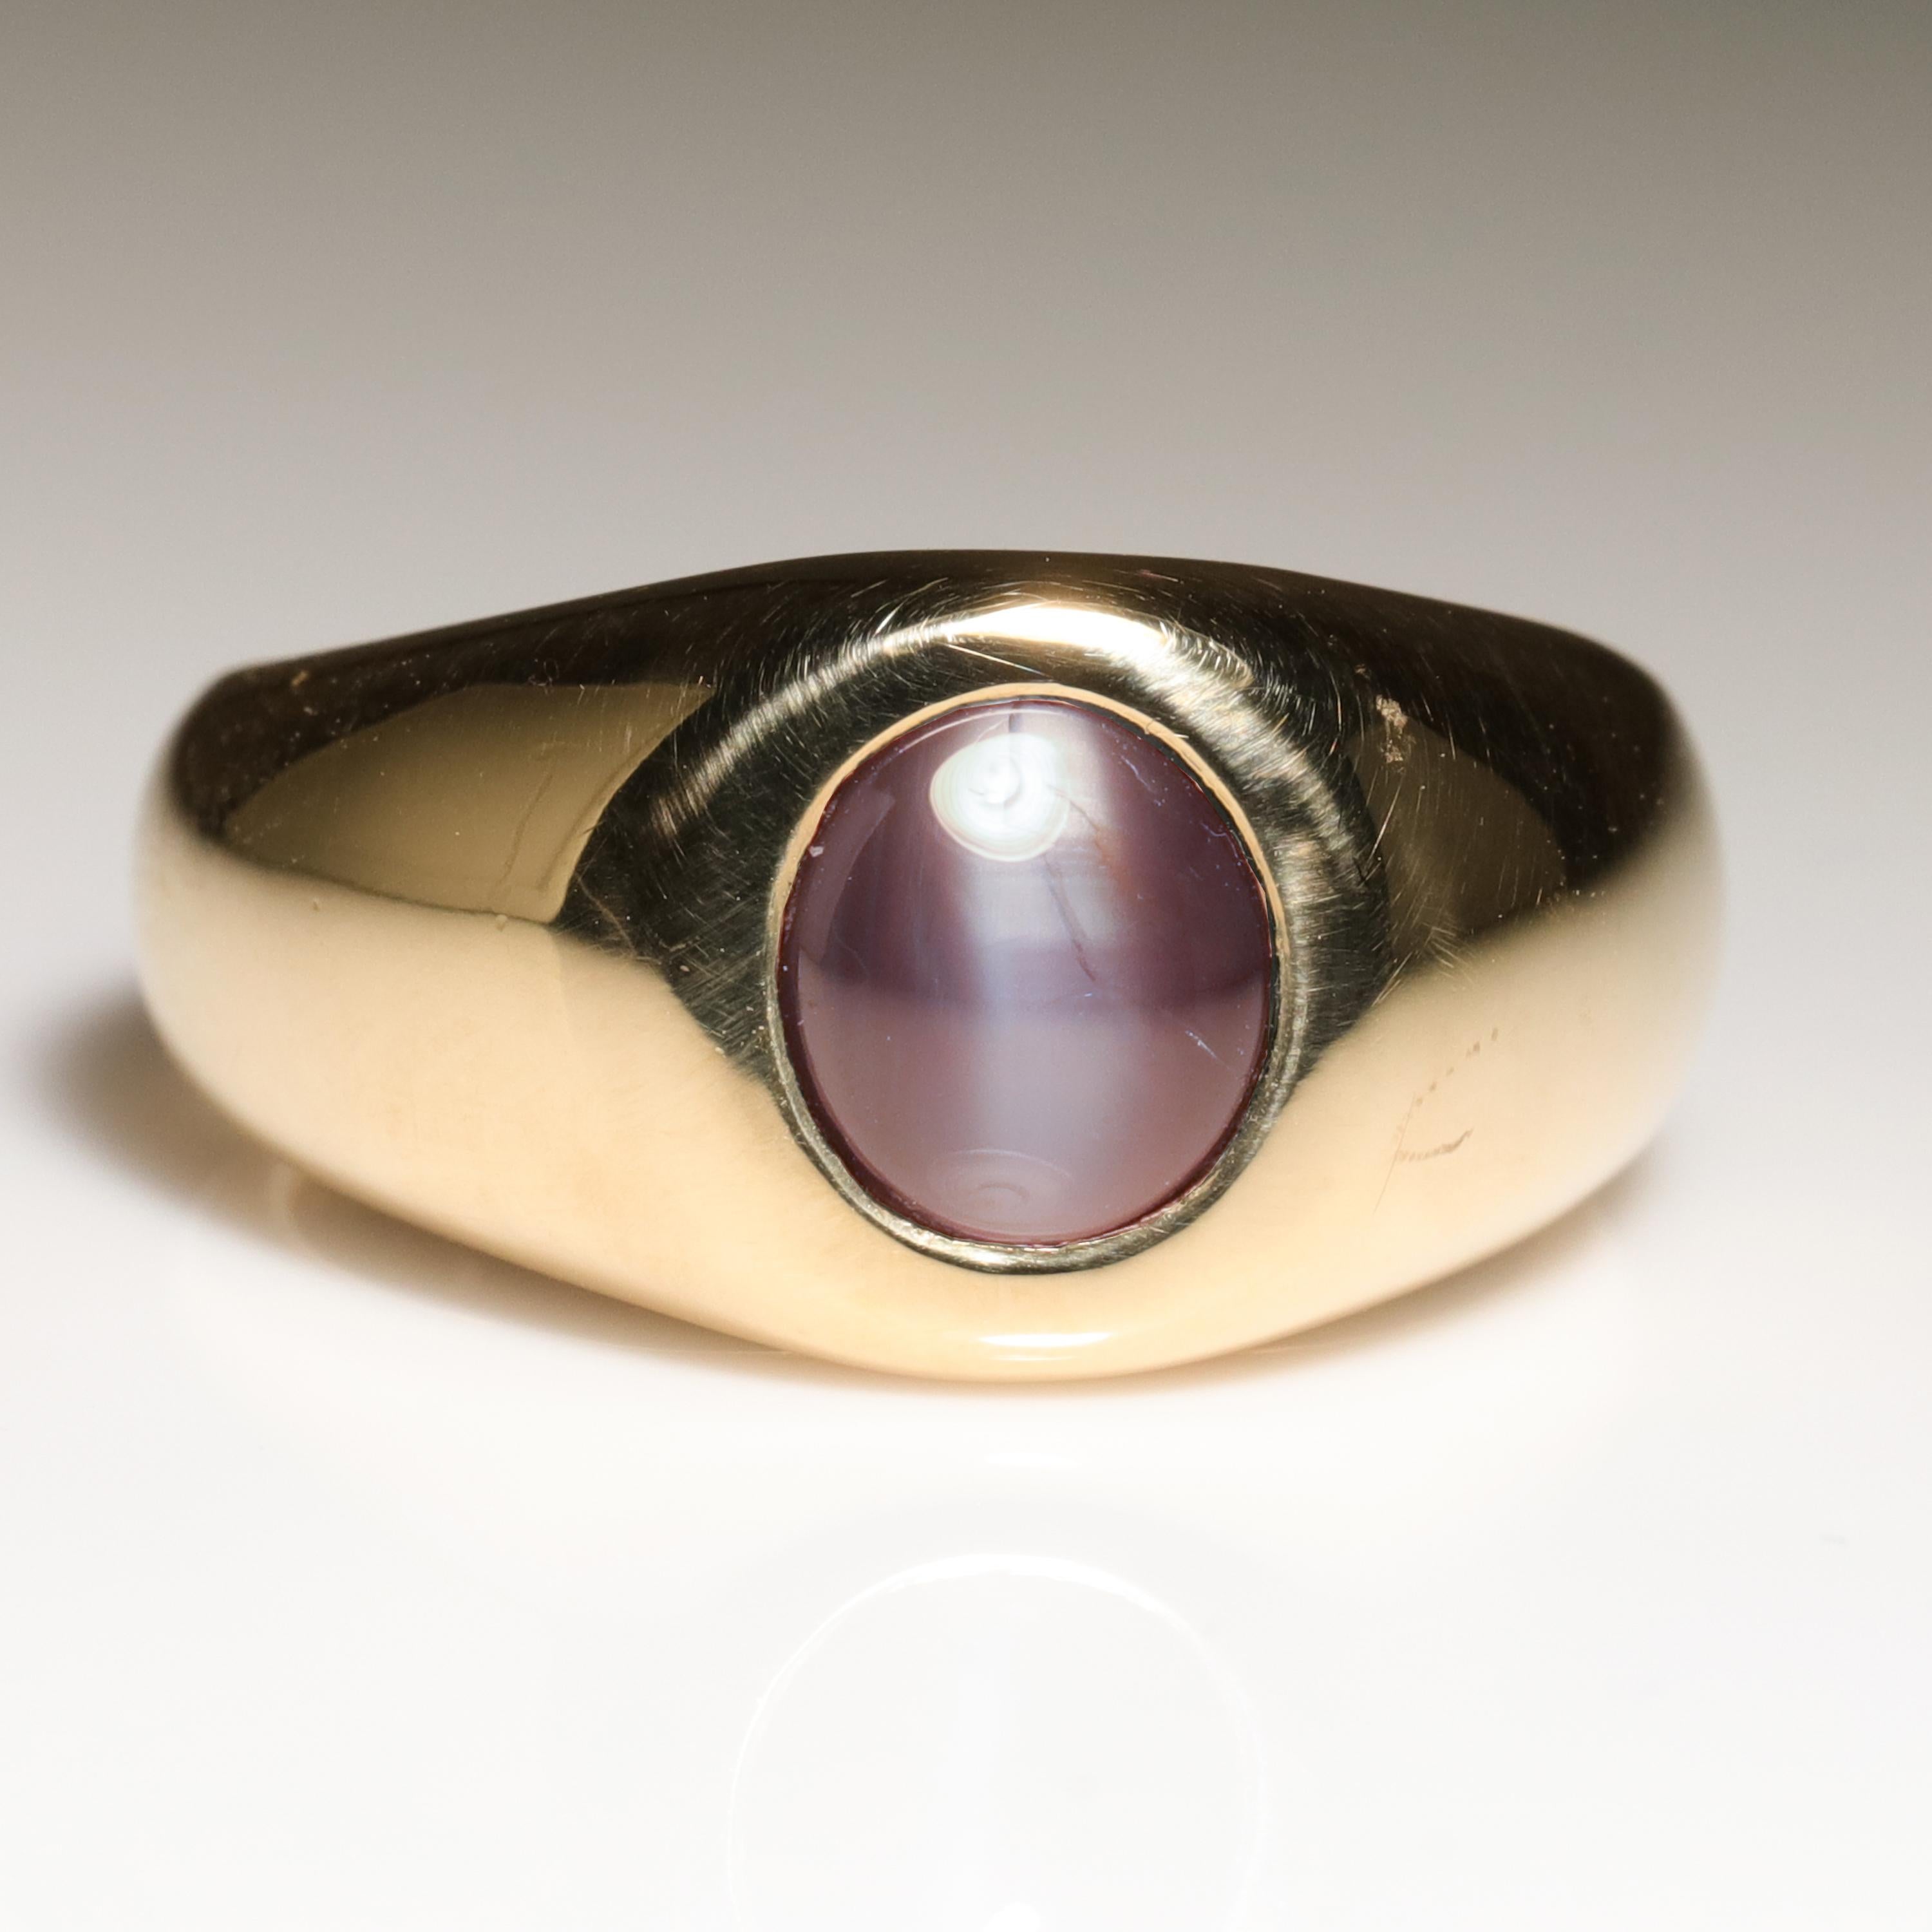 This dense and weighty (16.91 grams) men's pinkie ring is crafted in solid 18K yellow gold and features a natural and untreated alexandrite cat's eye gem, measuring approximately 7.65 mm x 6.84 and weighing about 1.30 carats. You may be familiar